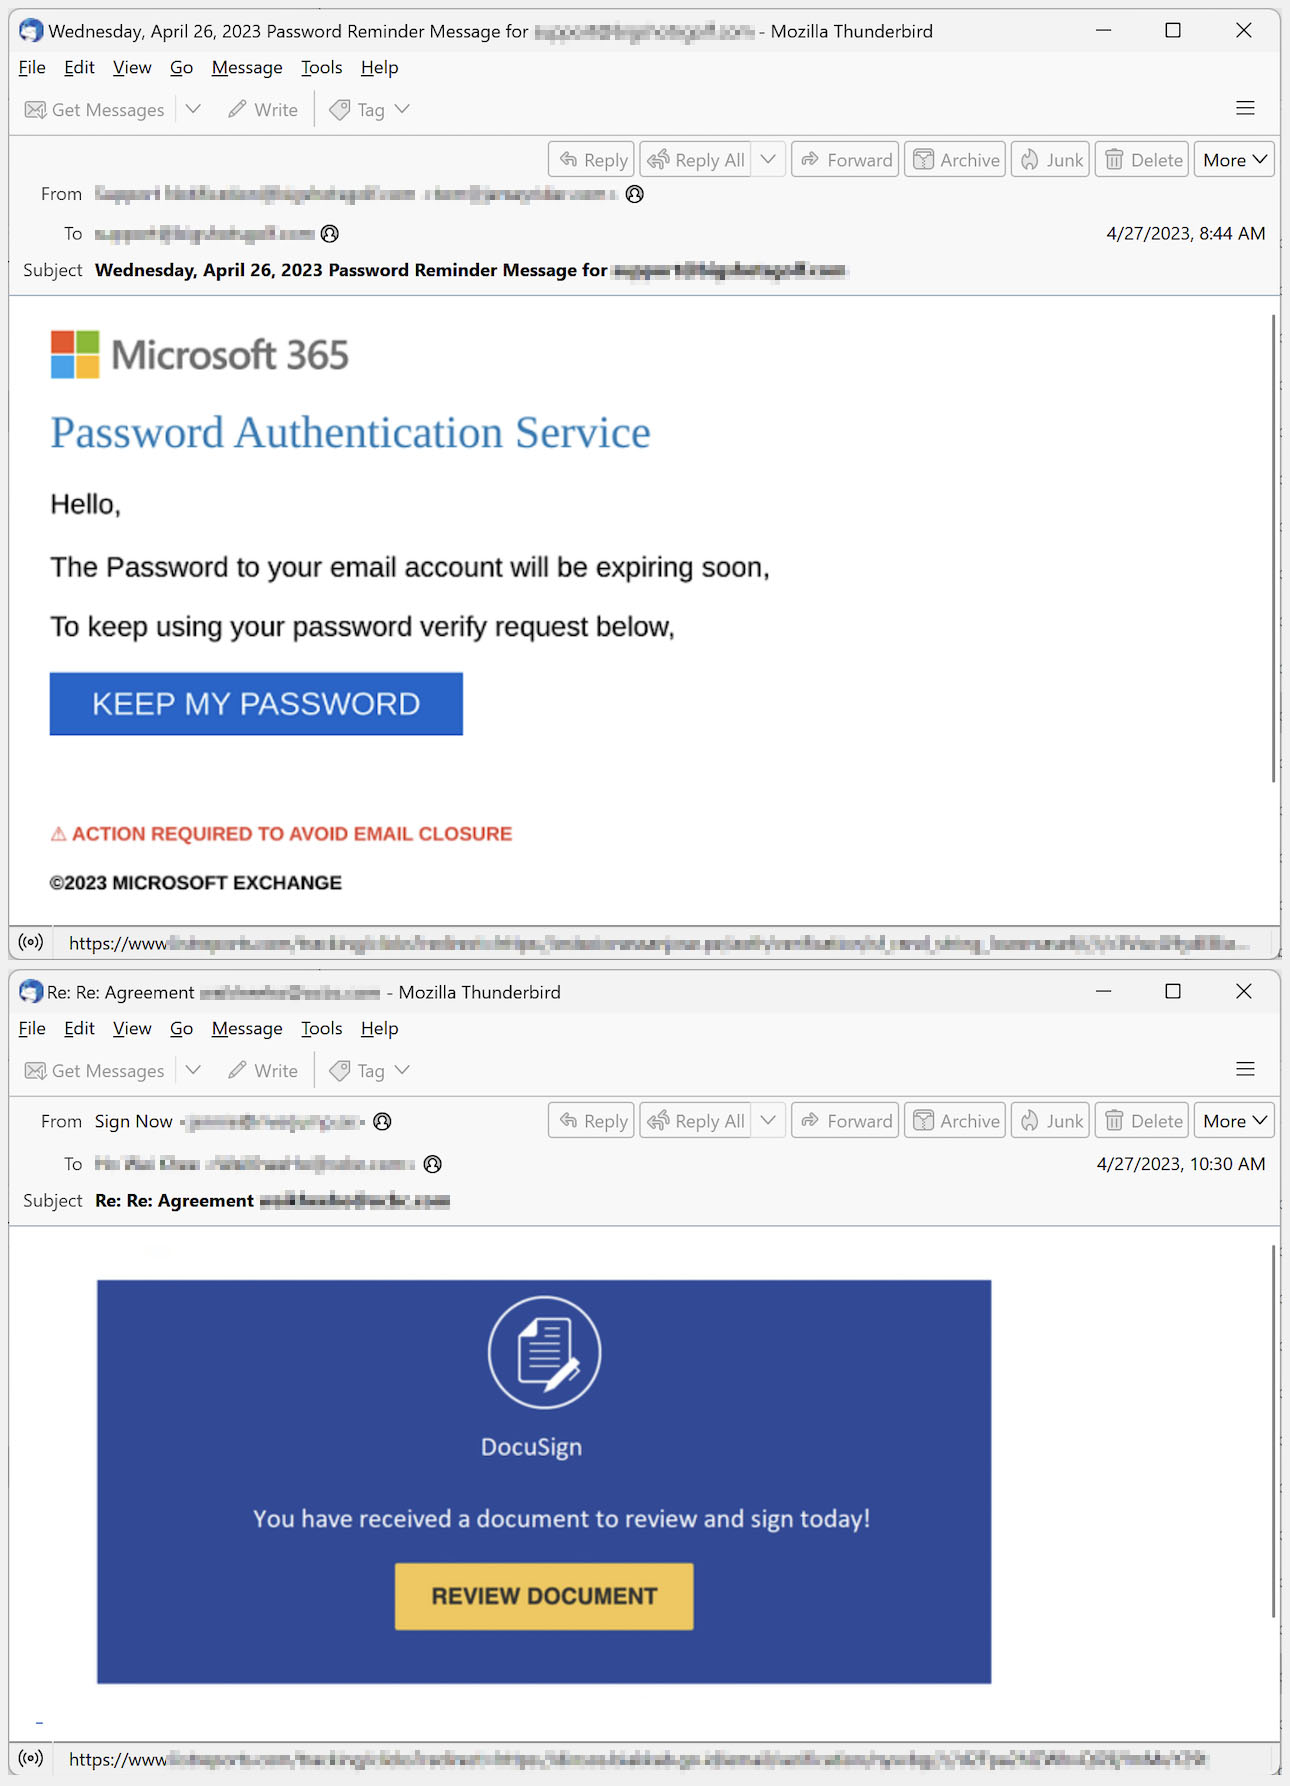 Example of a phishing email using malicious URLs in the email copy